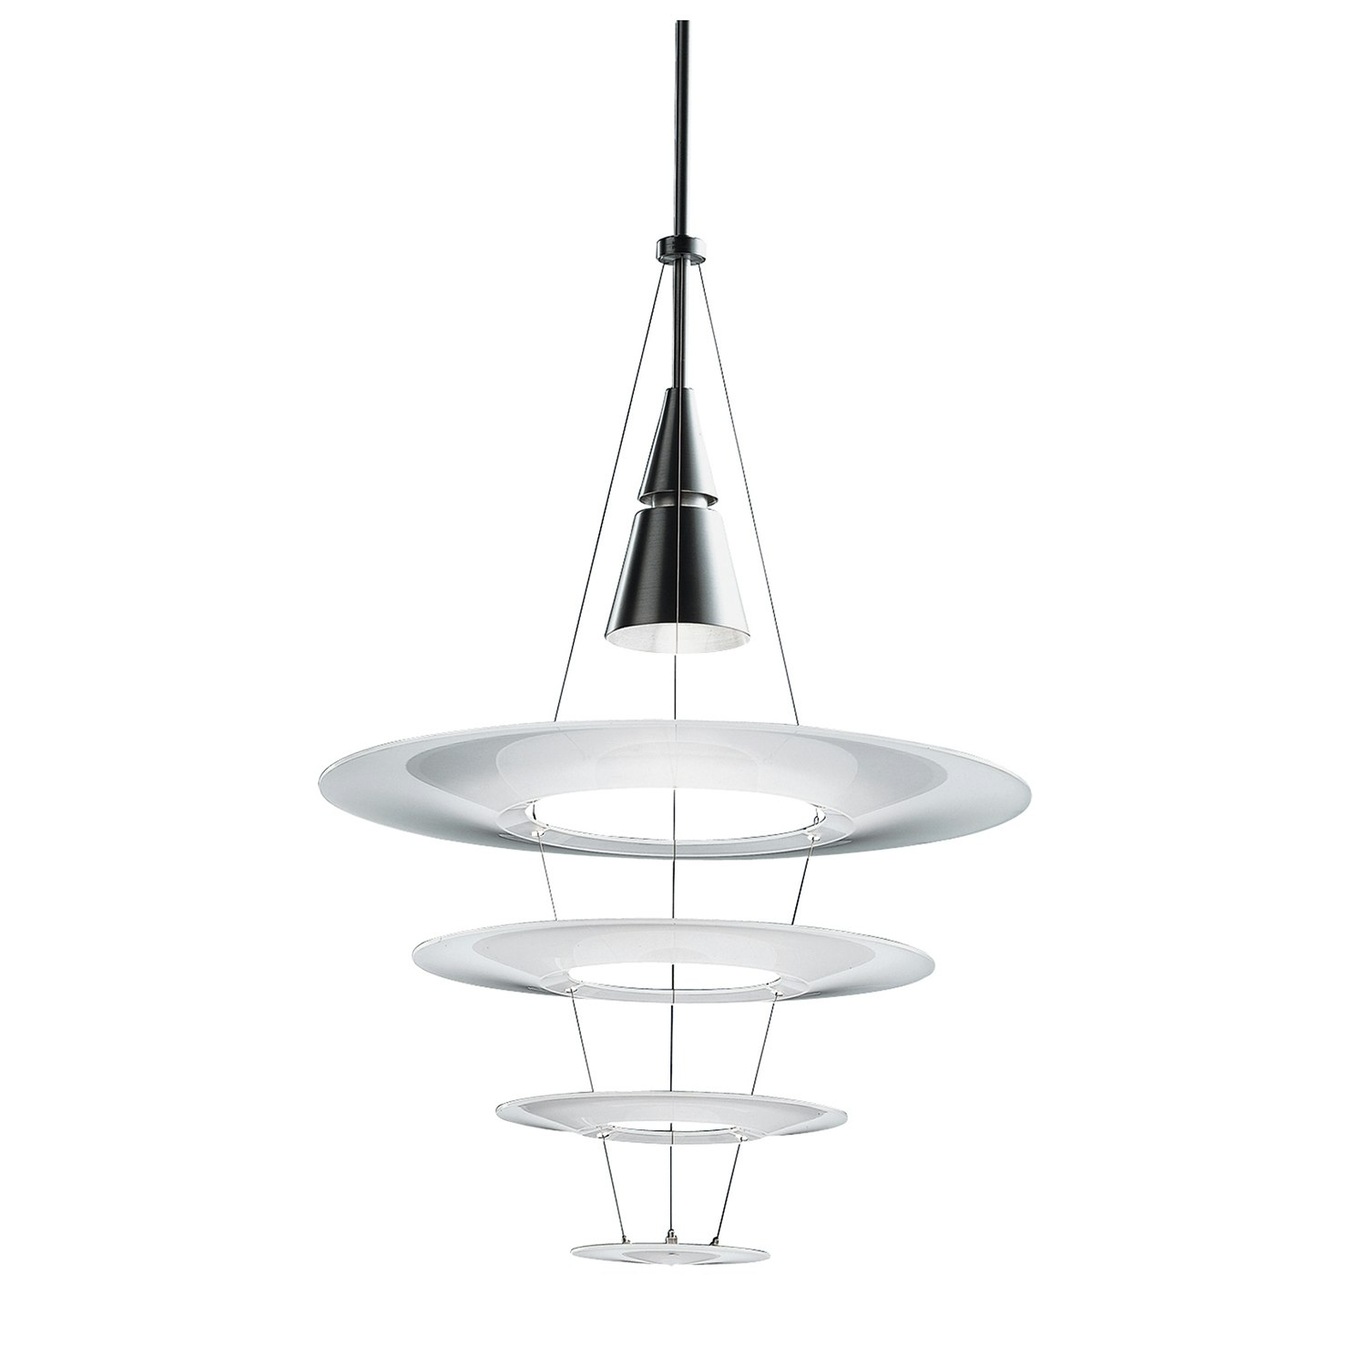 Enigma 425 Hanglamp, Wit